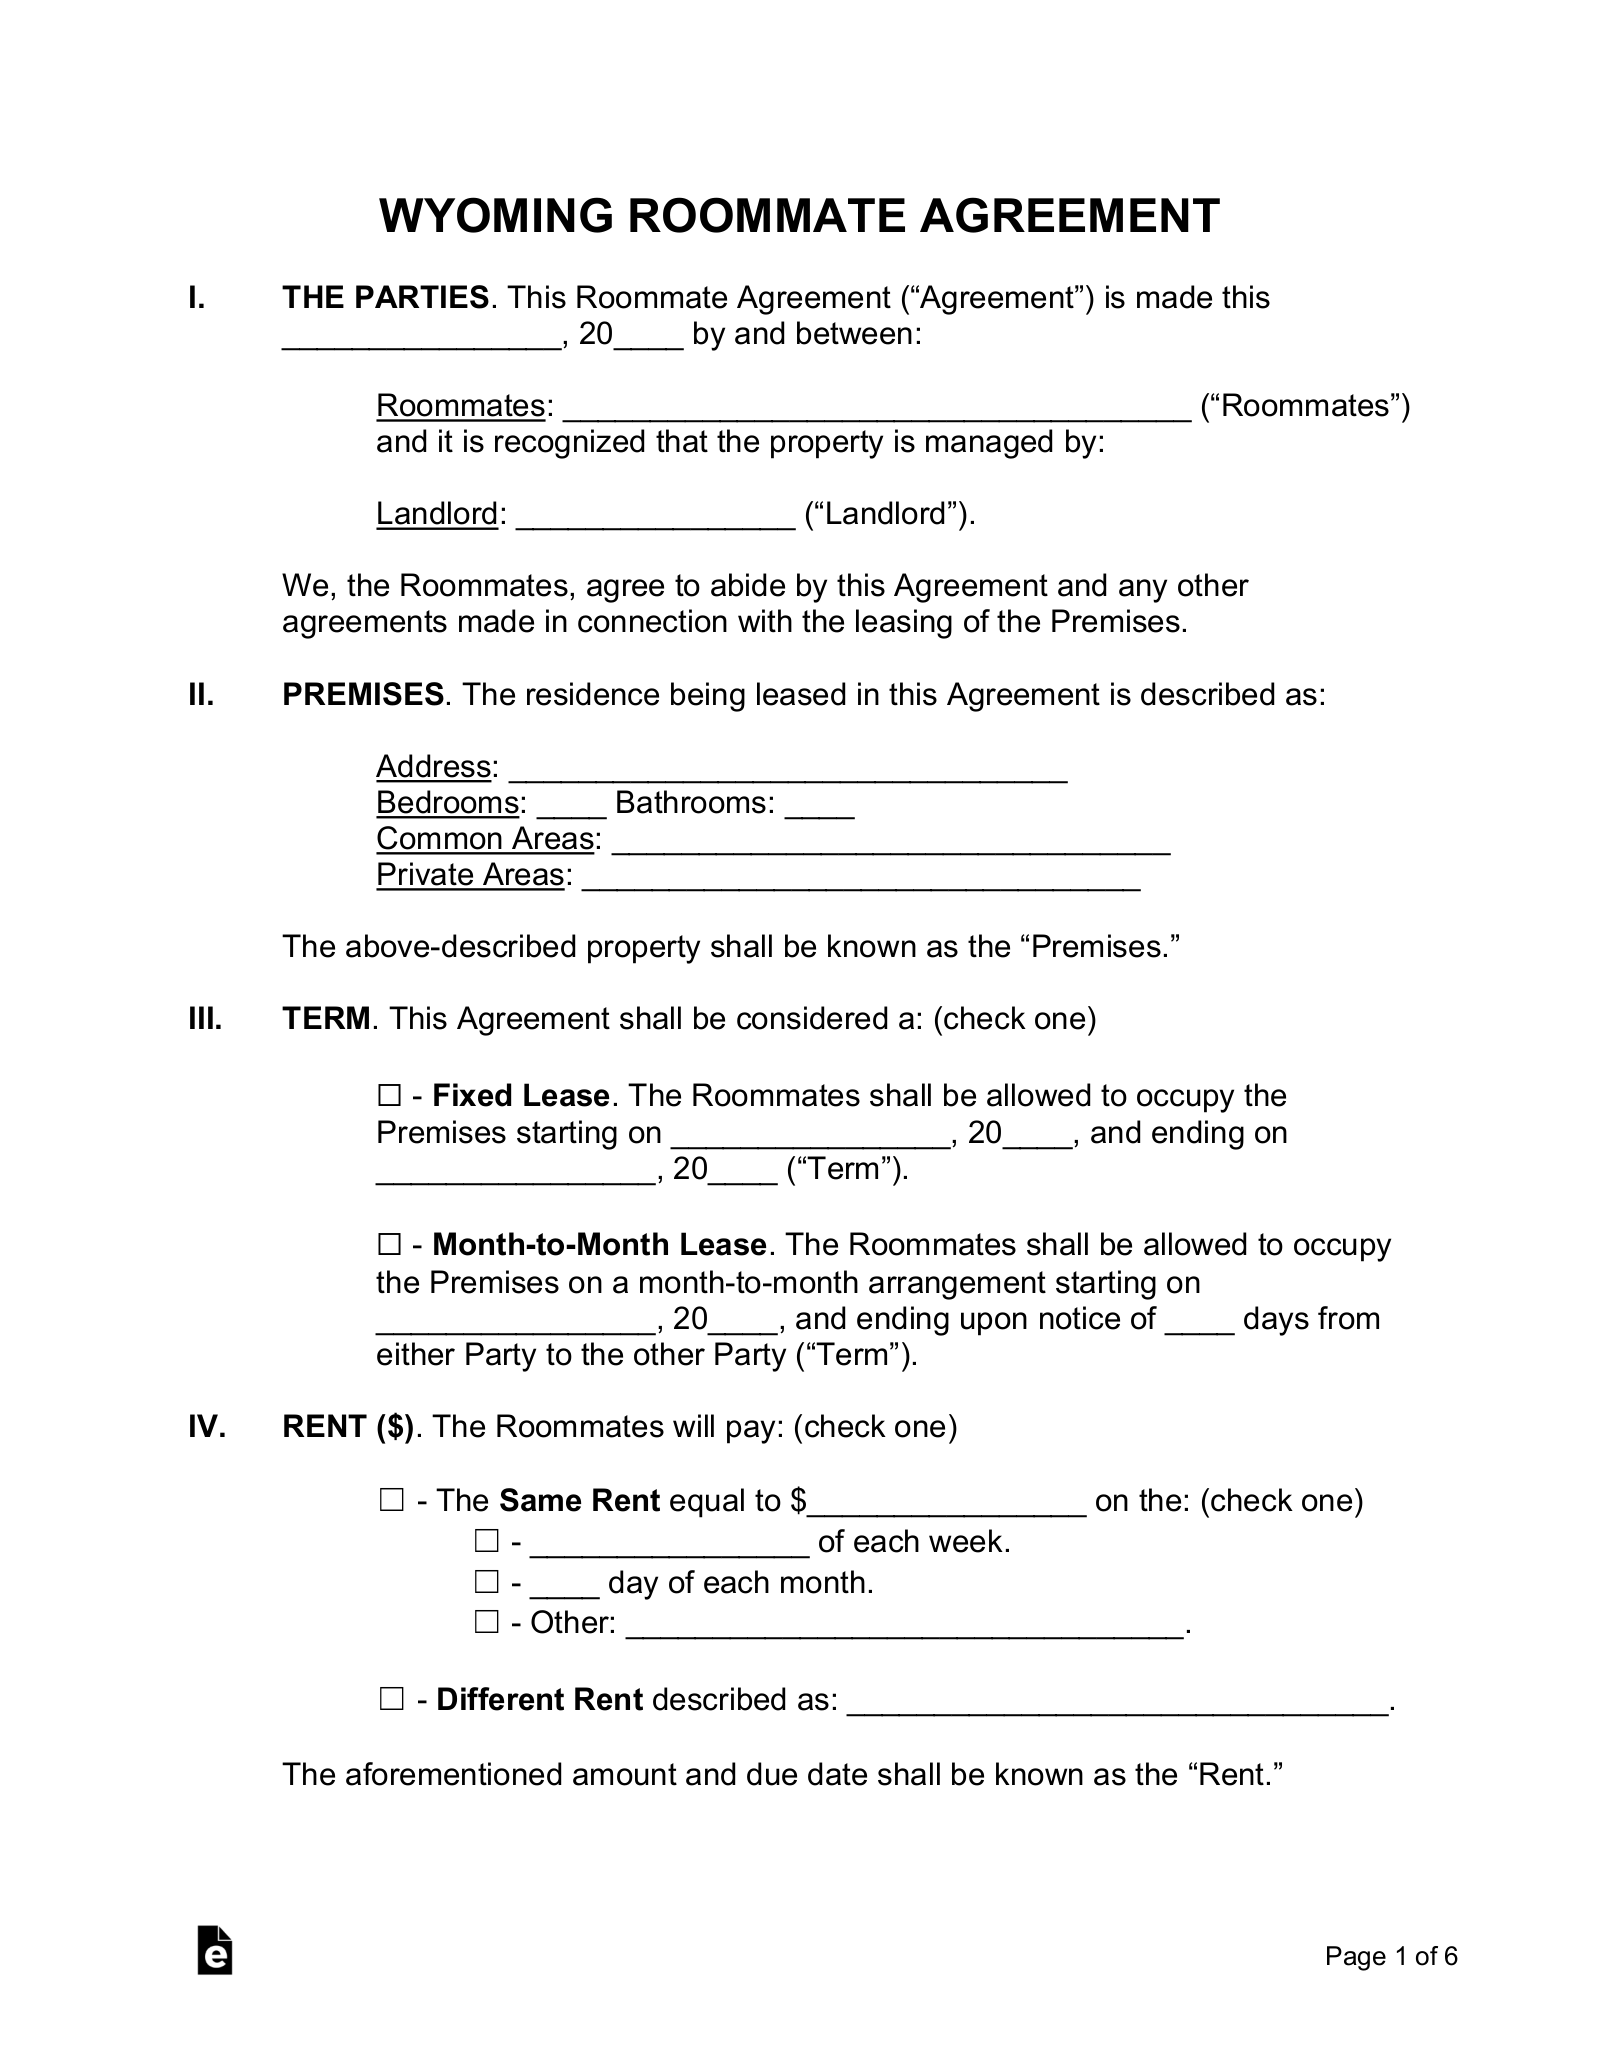 free-wyoming-roommate-agreement-form-pdf-word-eforms